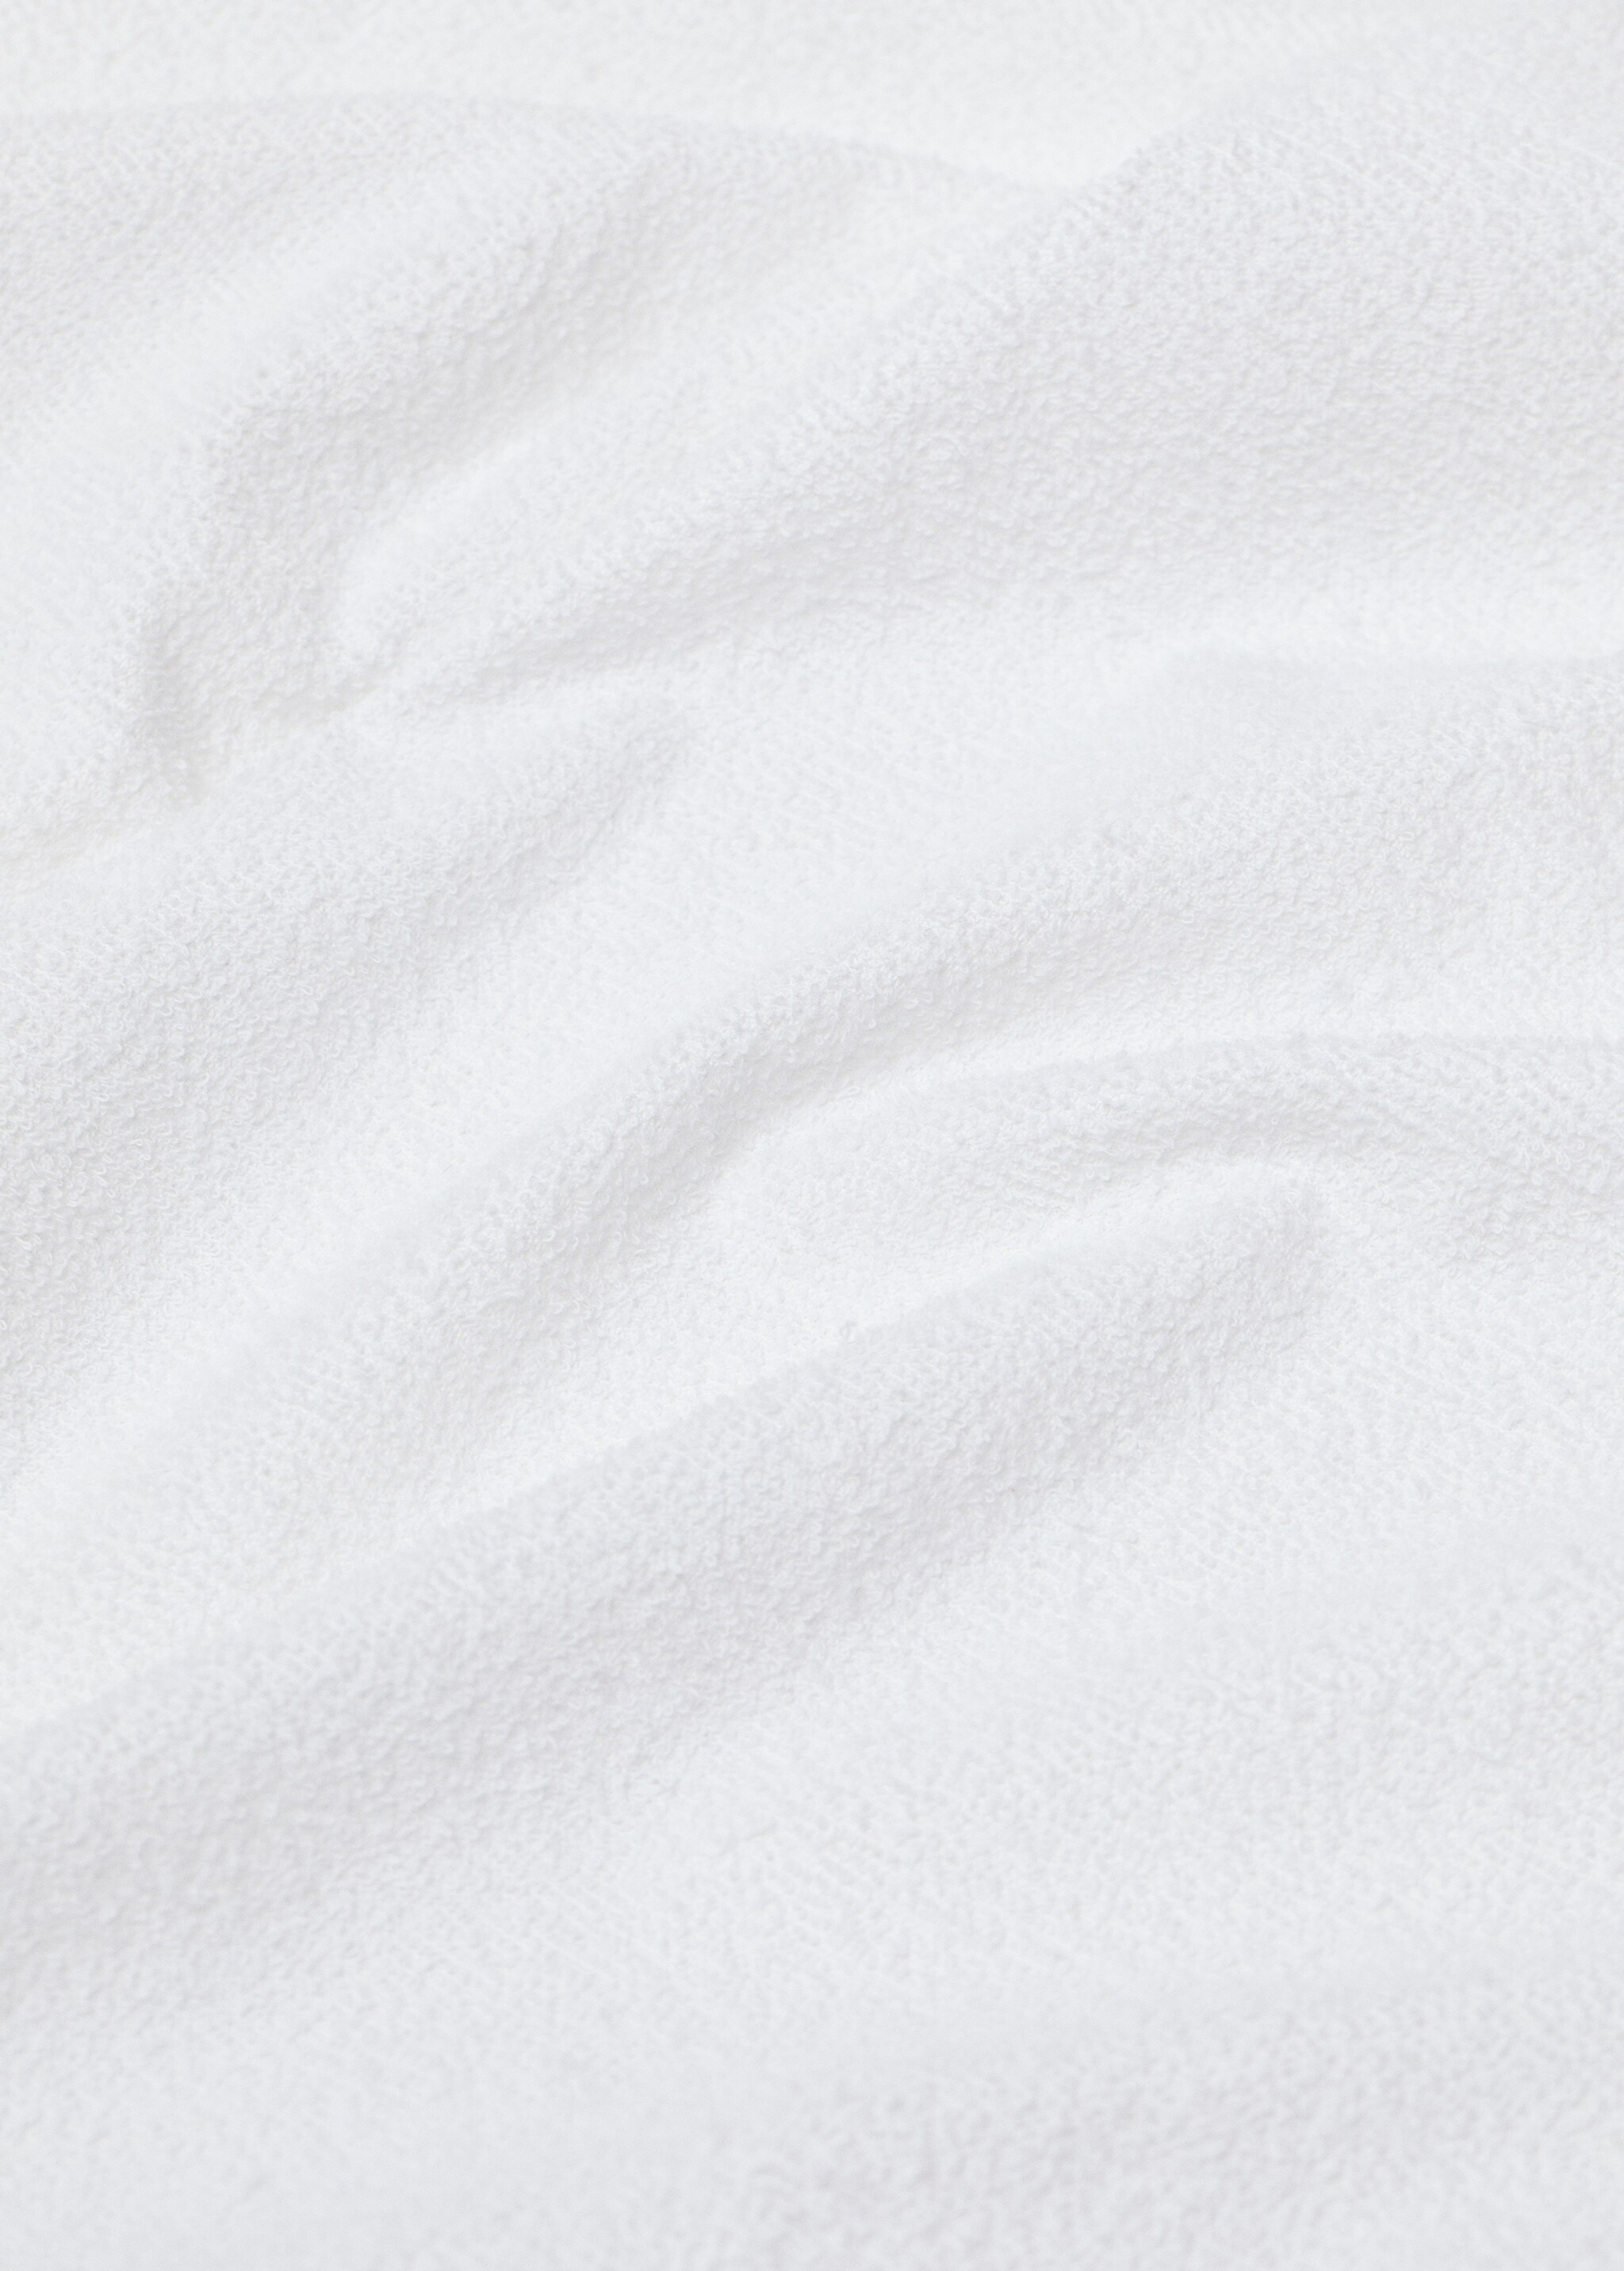 Mattress protector 150cm - Details of the article 2